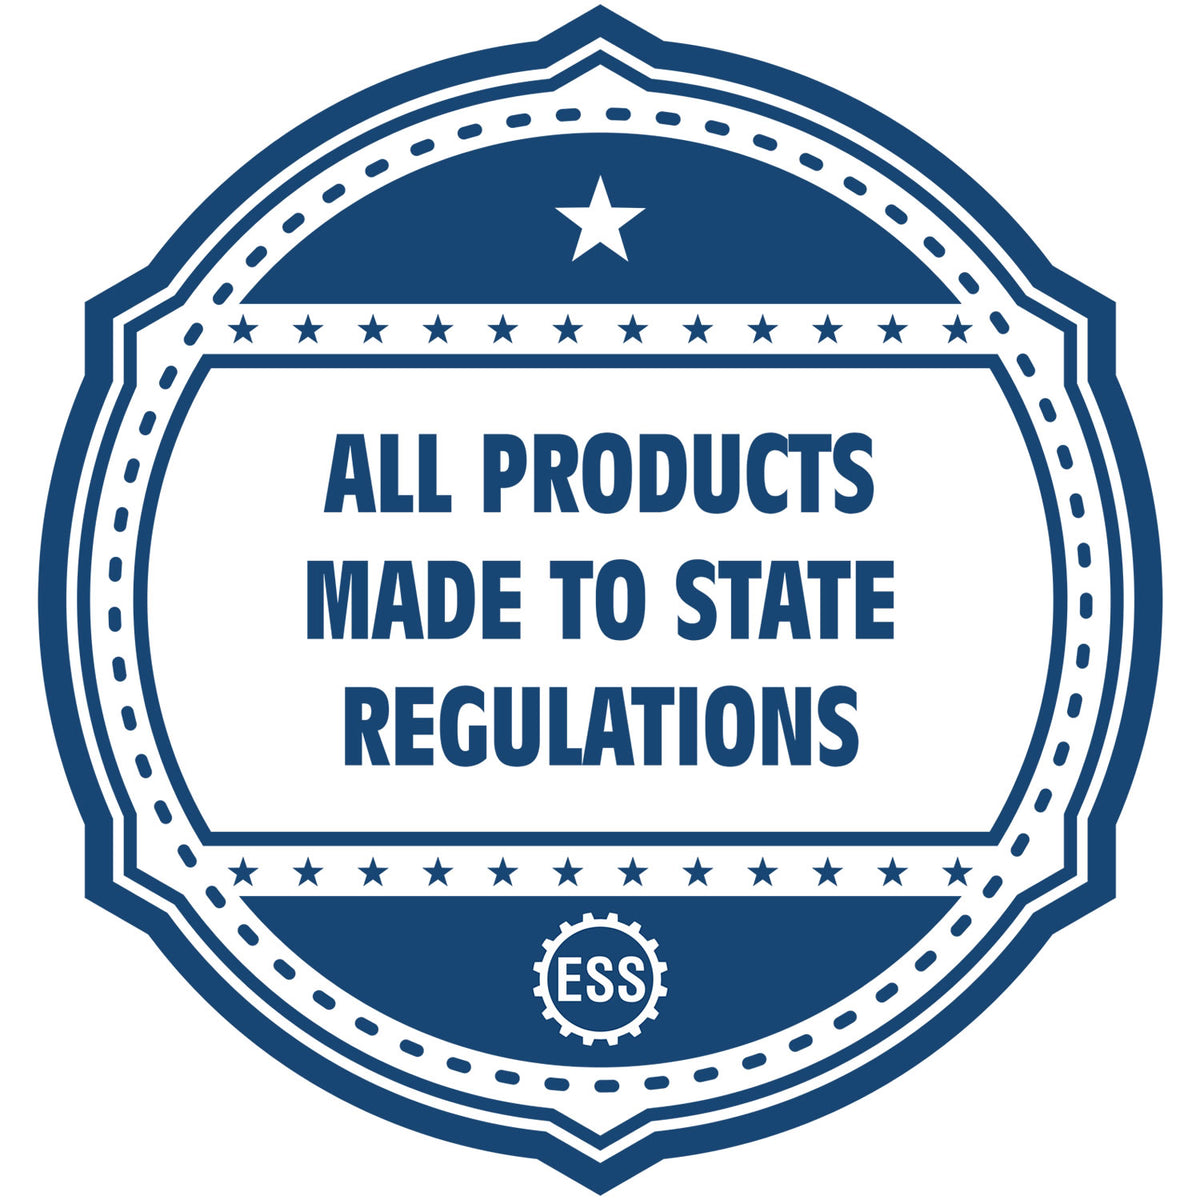 An icon or badge element for the Kentucky Desk Surveyor Seal Embosser showing that this product is made in compliance with state regulations.